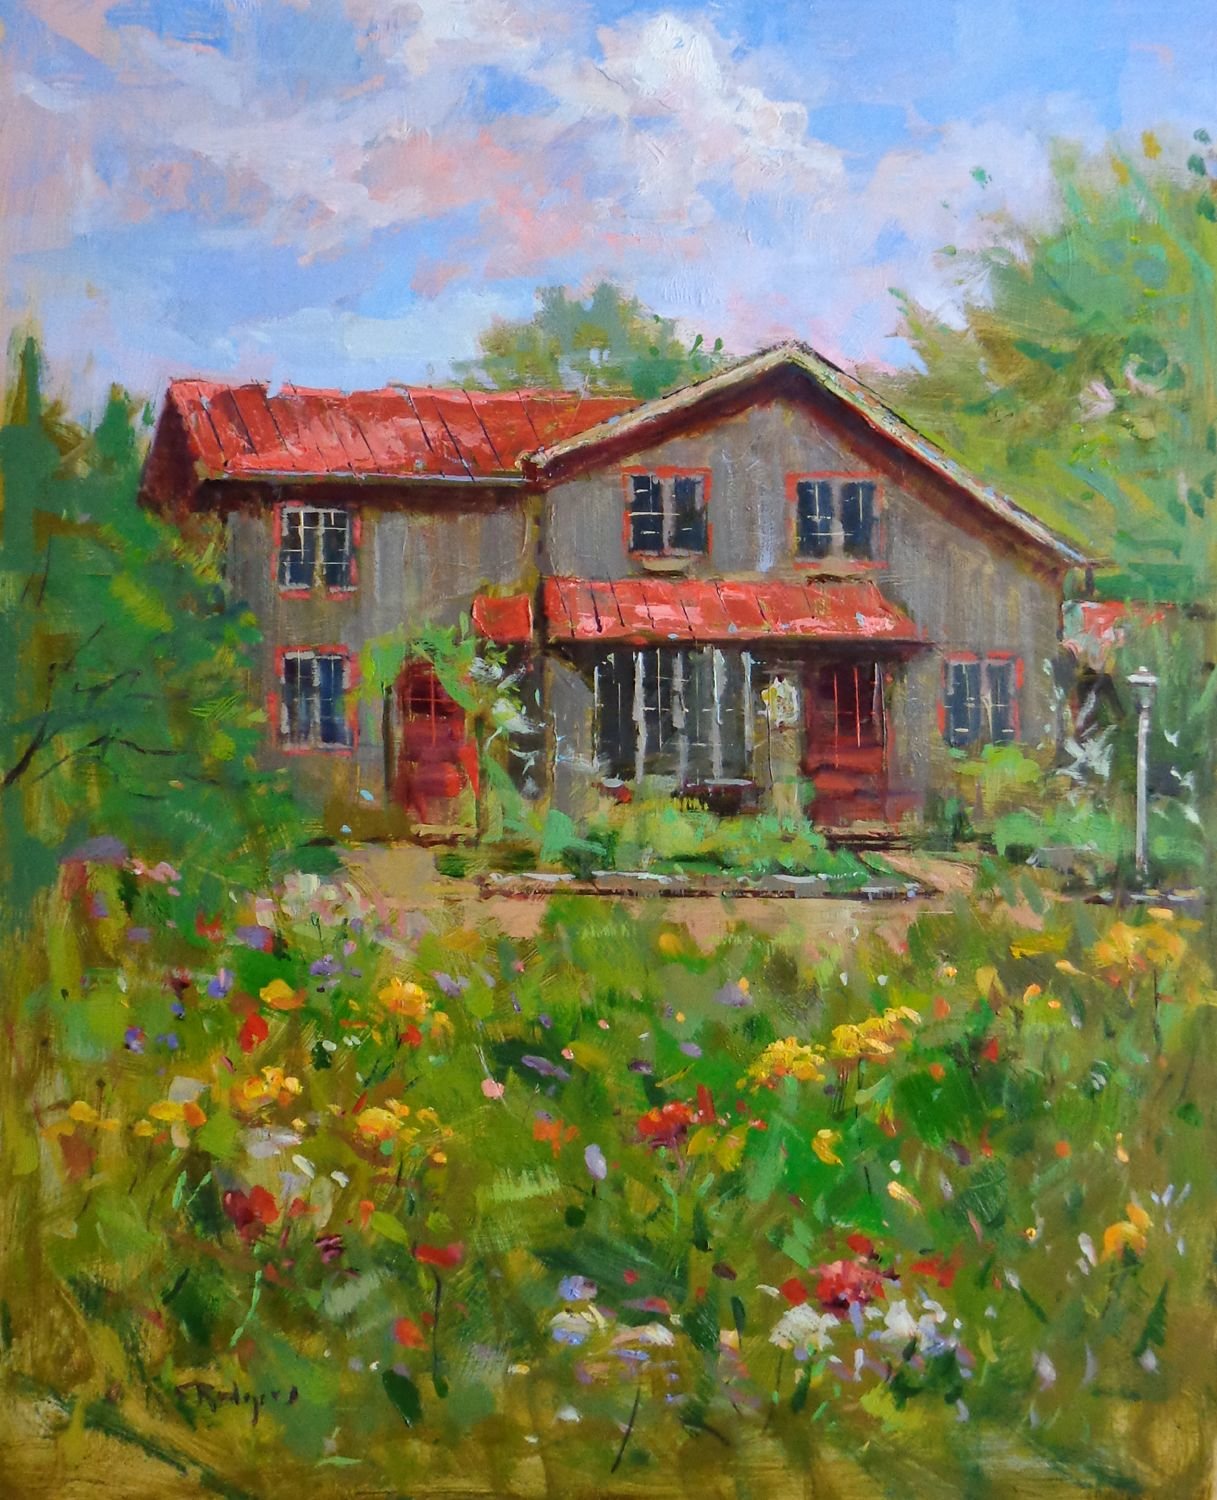 “Solebury Orchard in June” is an oil painting by Jim Rodgers.